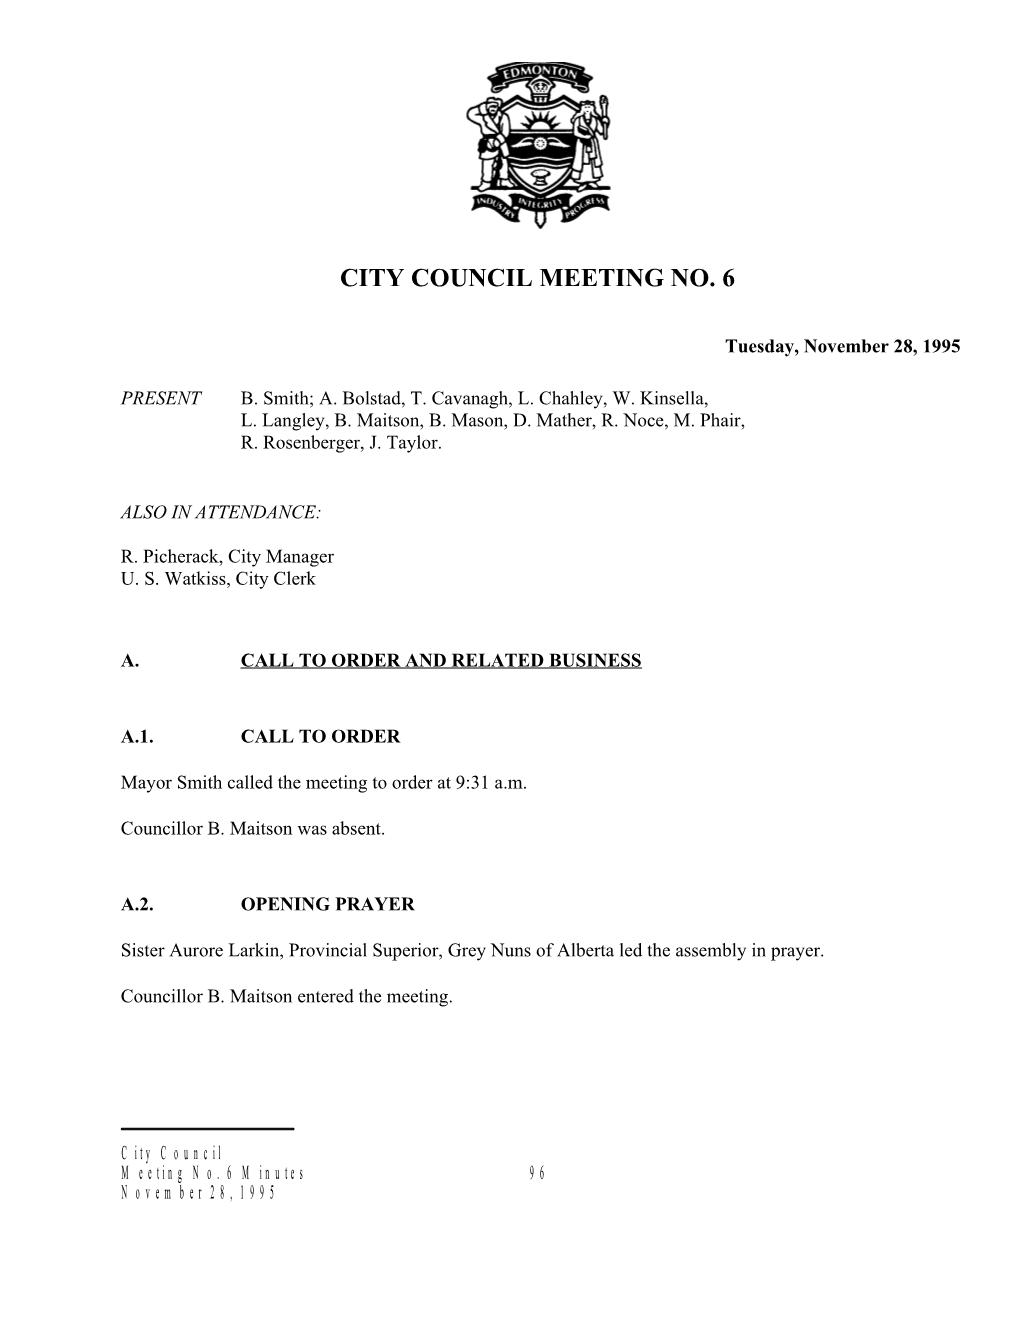 Minutes for City Council November 28, 1995 Meeting